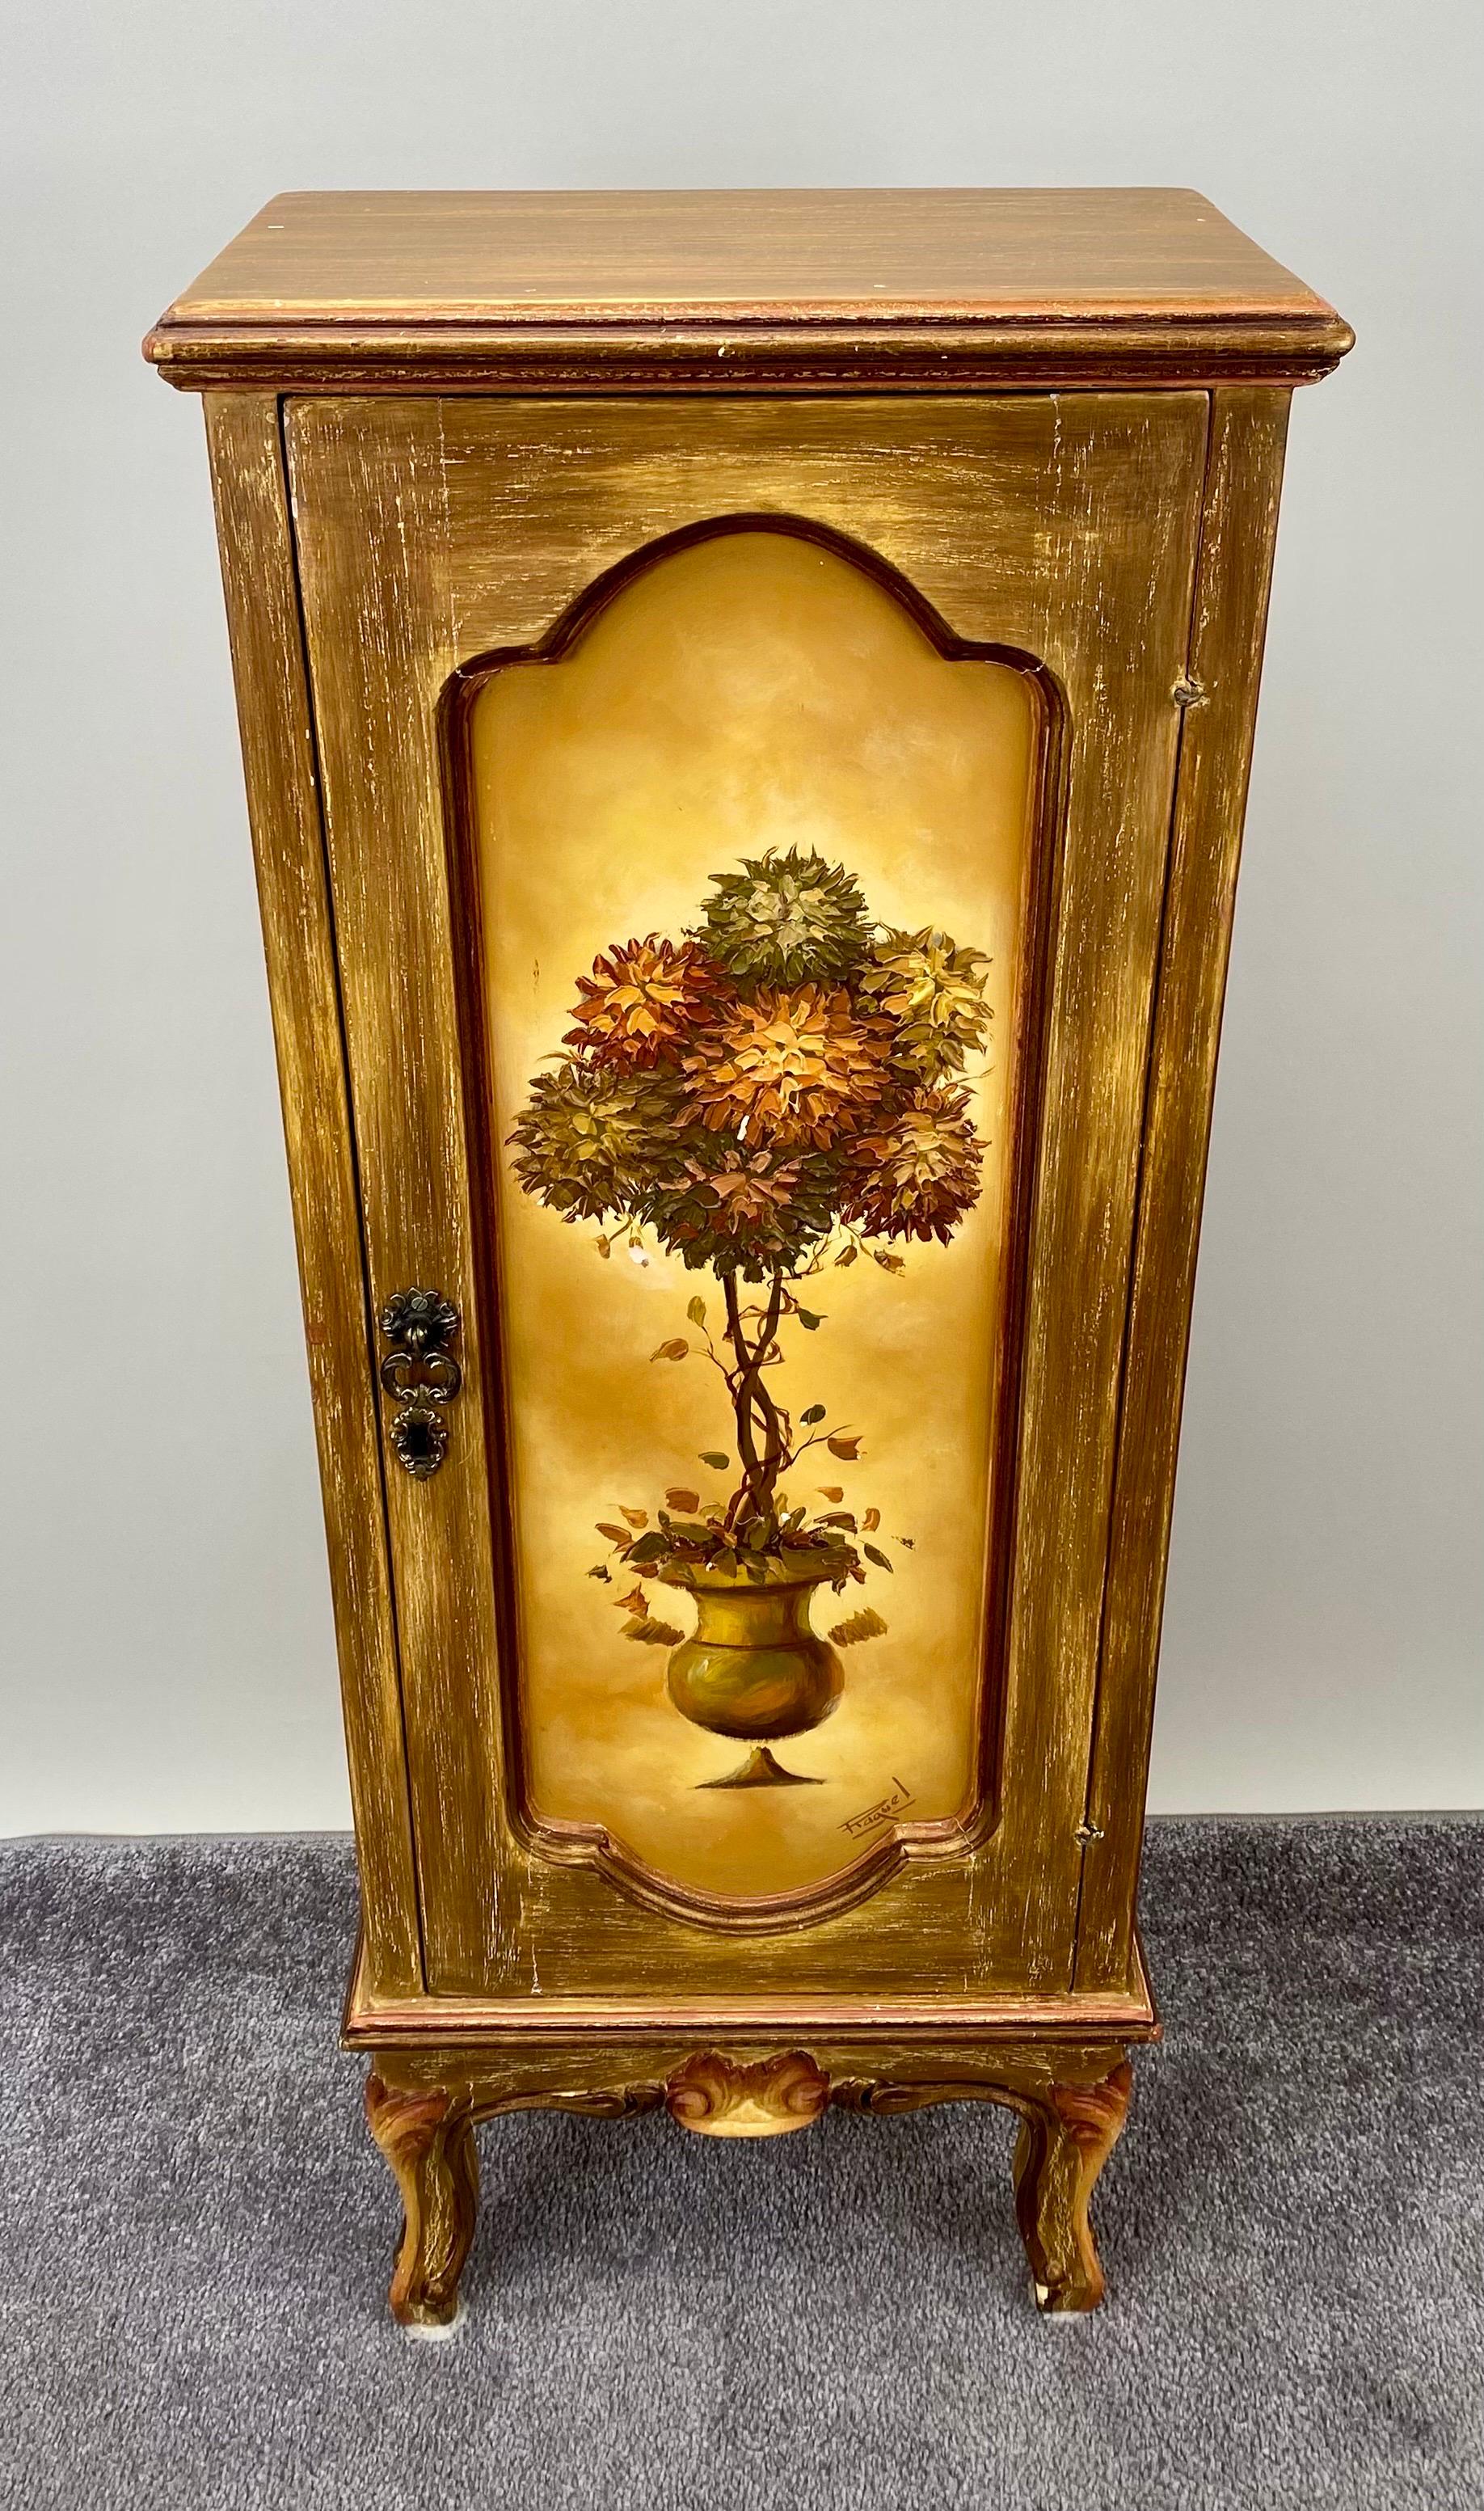  A French Provincial  one-door nightstand, a testament to the artistry and craftsmanship that define the allure of this classic piece. The door itself stands as a canvas of hand-painted splendor, depicting a delicate tree or plant within a